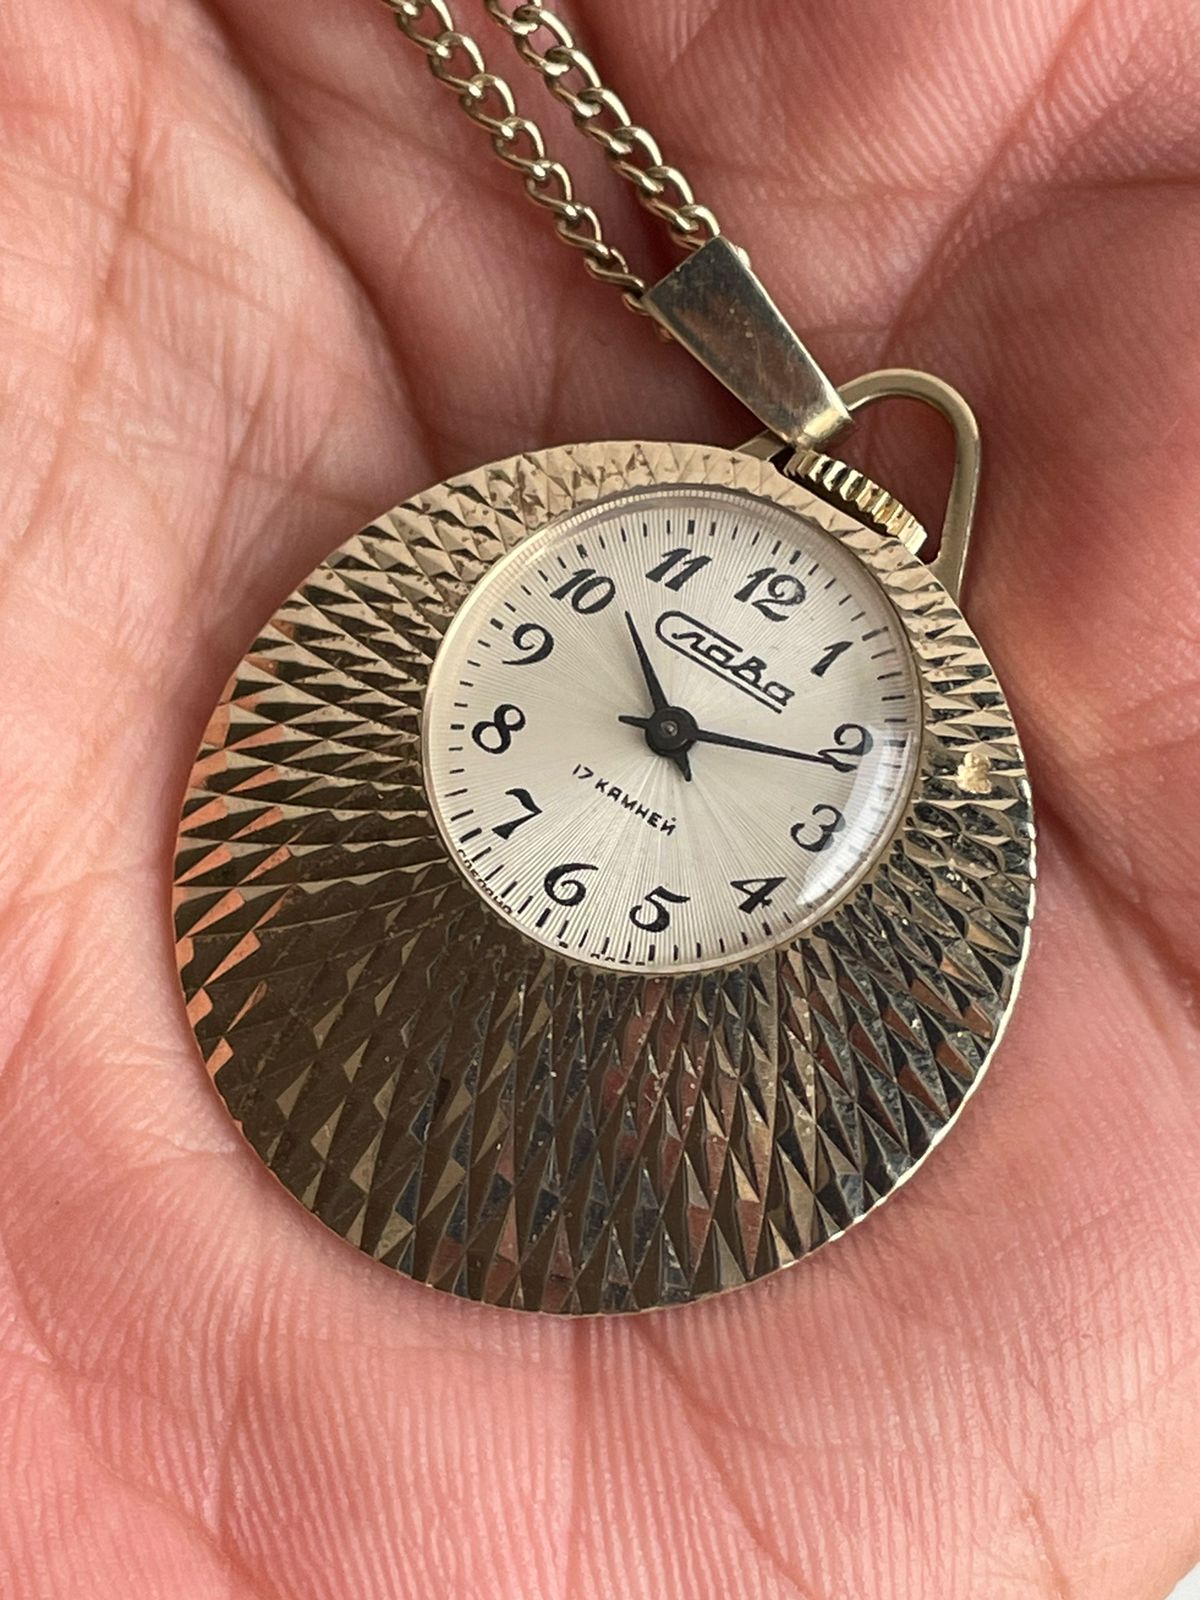 Buy Vintage Watch - Russian Pendant Watch With Chain | The Revolver Club |  The Revolver Club